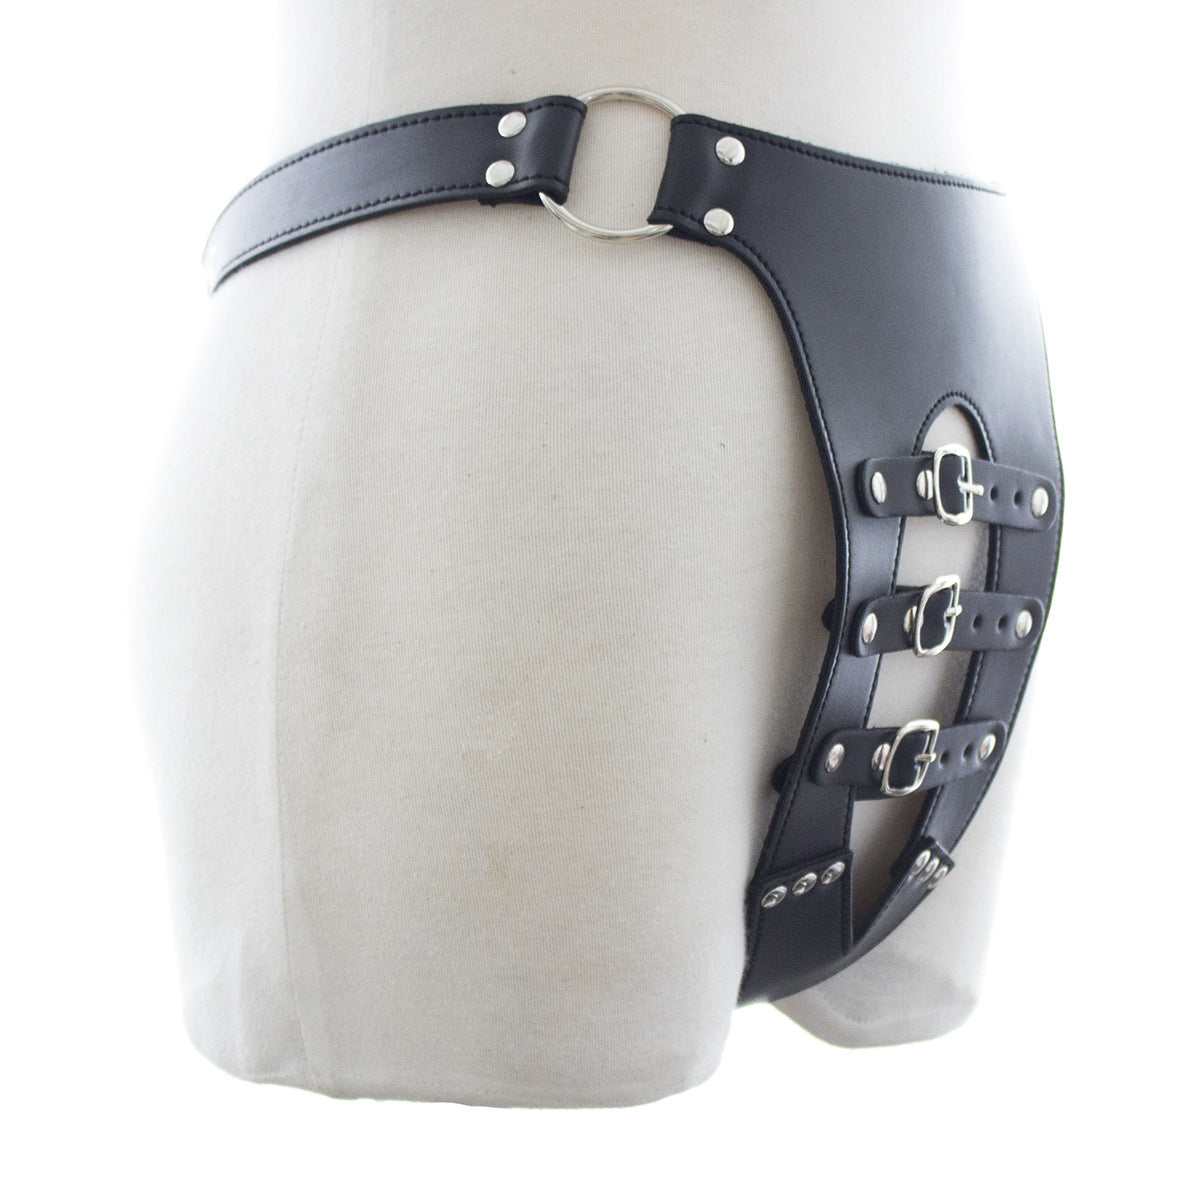 Male Chastity Belt with Buckle Detail